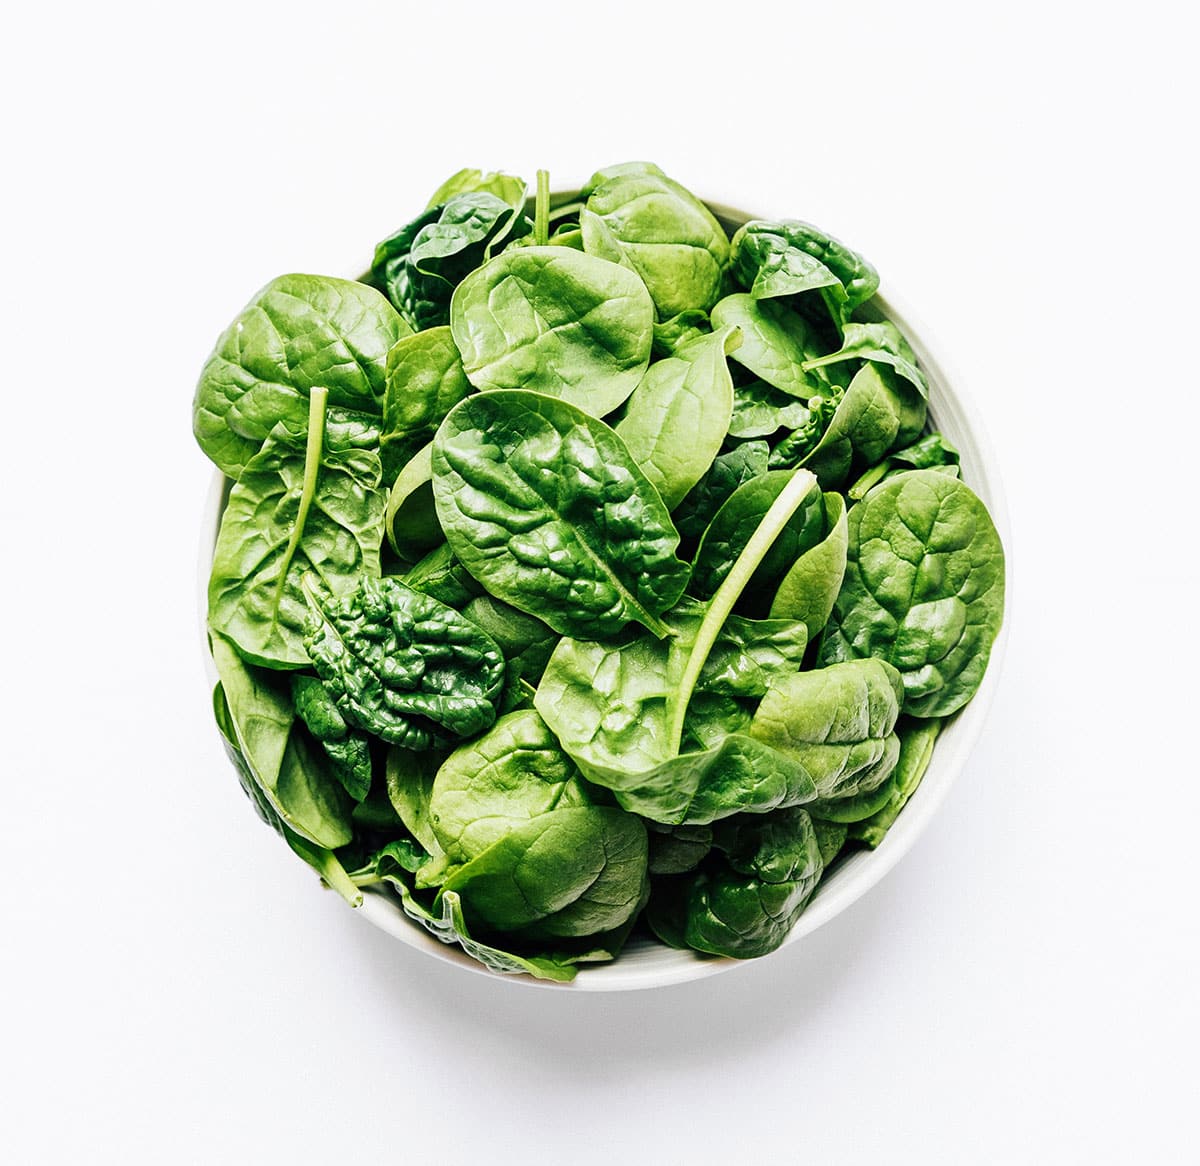 Spinach leaves in a bowl on a white background